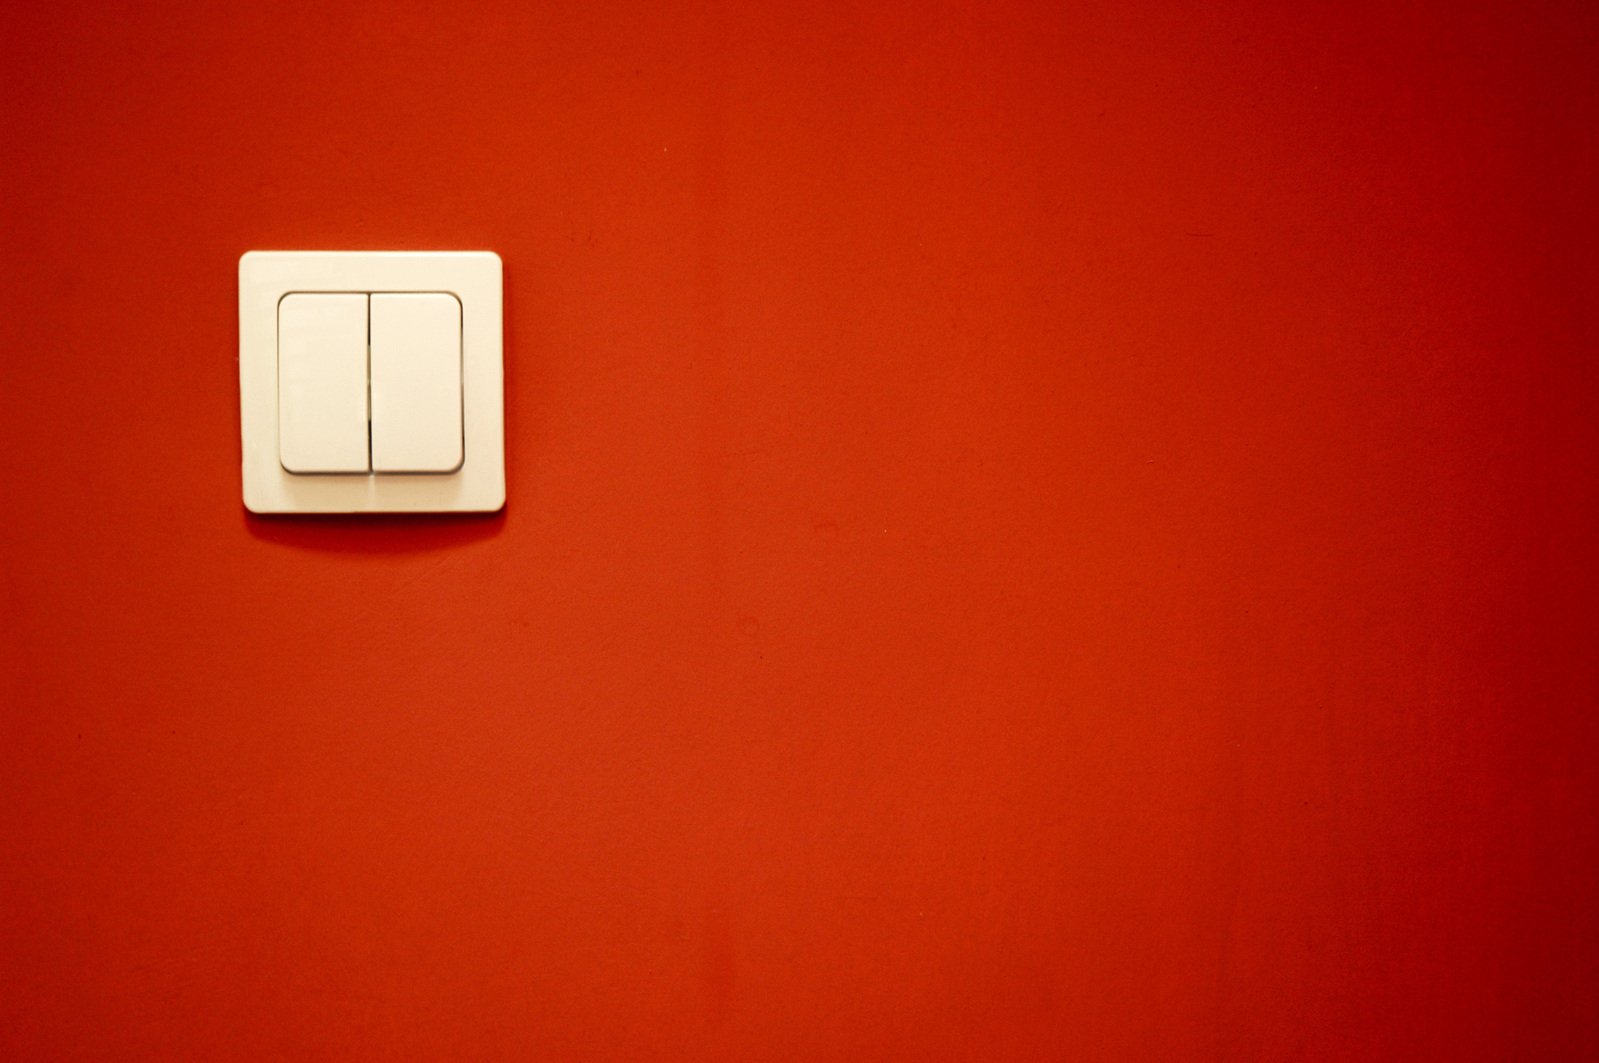 two light switches on a red wall with a white light switch on it